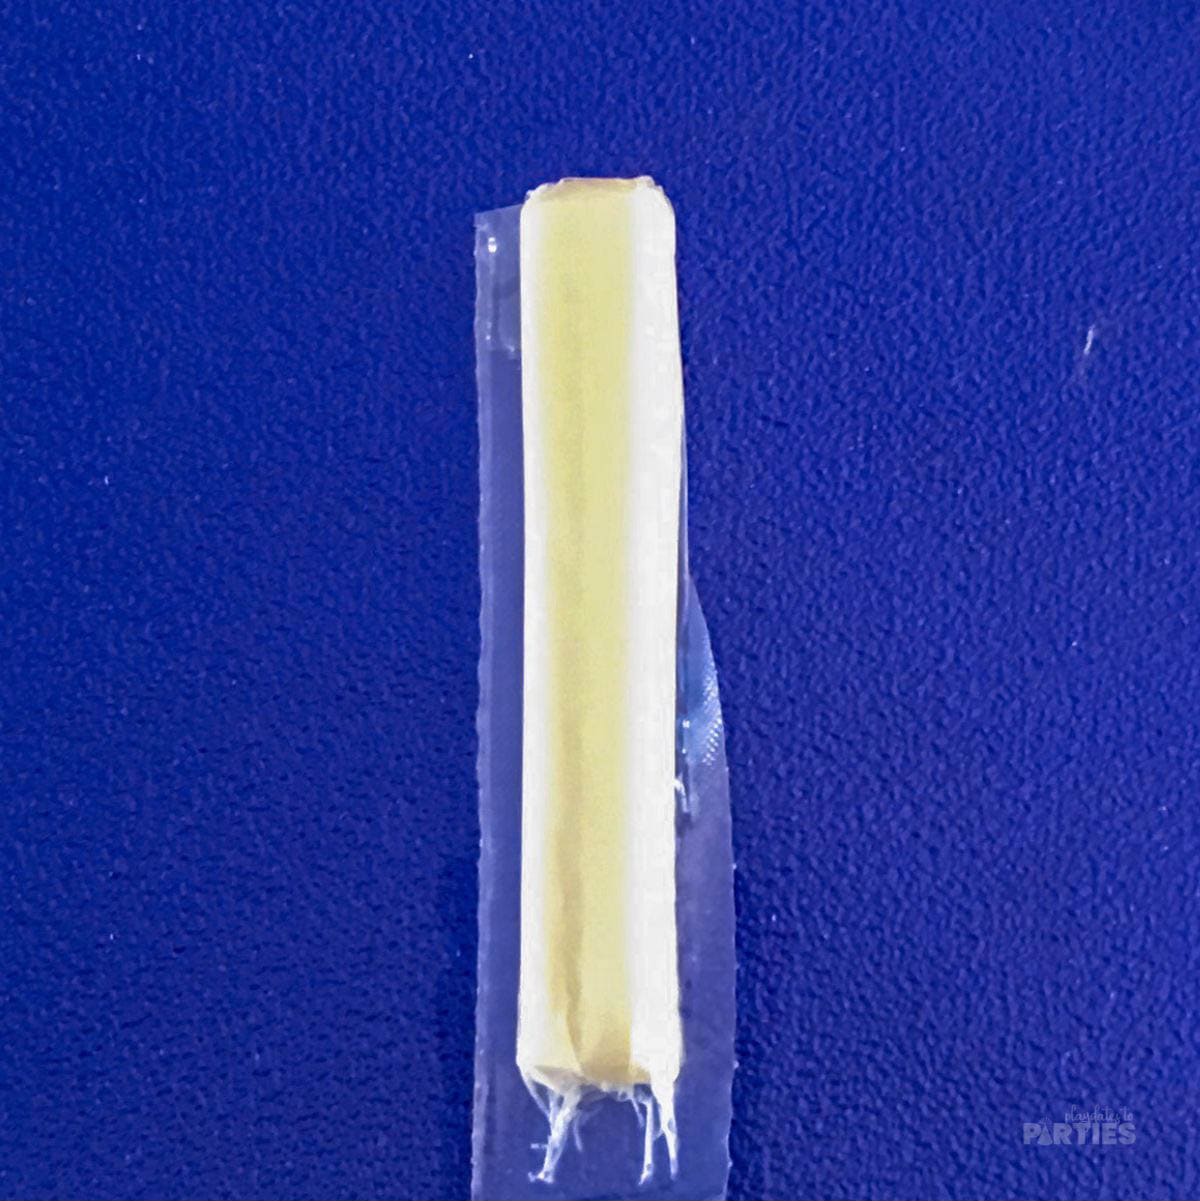 Folding the flaps back on the string cheese.